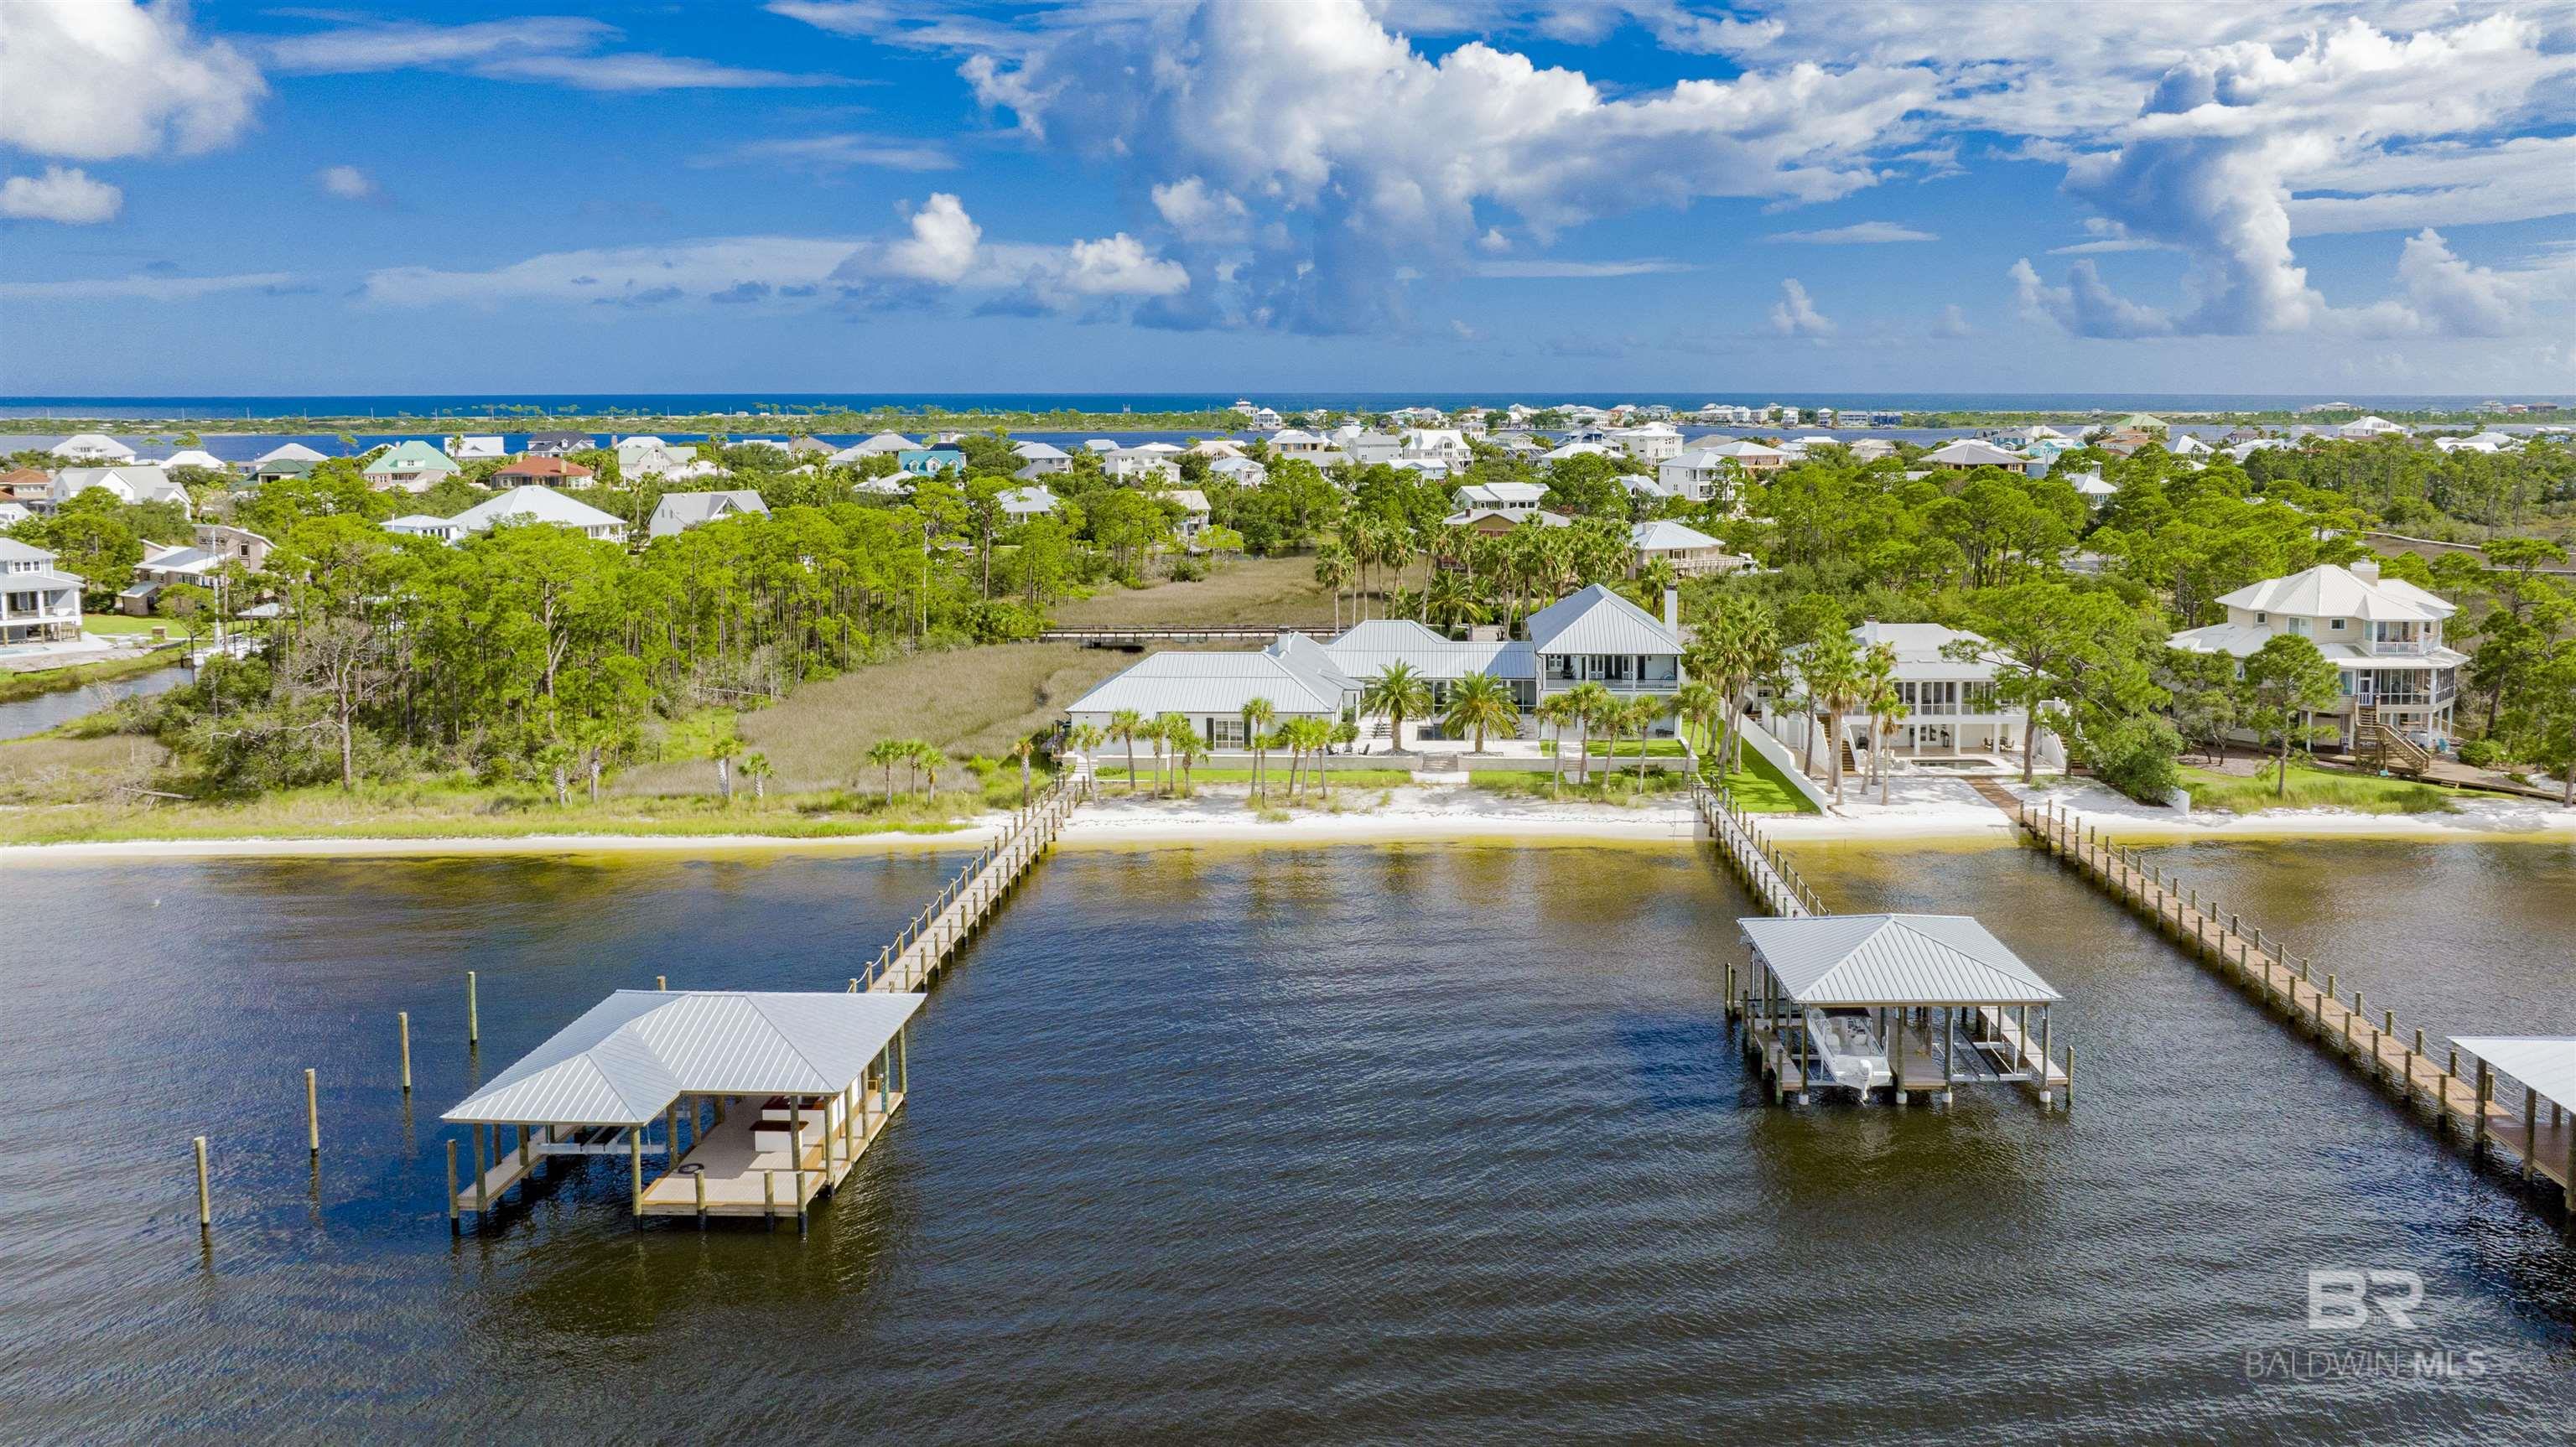 We often hear "one of a kind."  This property is truly, "One of a Kind".  Situated on two lots, PPIN numbers 106153 and 99457 (1.85 acres) on deep water by the ICW, is a stunning home that epitomizes luxury, beauty, functionality, durability, and comfort.  From the remarkable kitchen to the pier systems, and the heated and cooled 4 bay garage, there are too many prominent features to detail in this set of remarks.  In documents, you will find "Additional Information."  I think you will find it extremely interesting and worth the read.                                                                                                                                Virtual Tour 1 is a Matterport production.   Copy and paste      https://my.matterport.com/show/?m=bxce89MecQg&brand=0                                                                                                                                                                                                                                         Virtual tour 2 is a drone video.   Copy and paste      https://tours.averadesign.com/public/vtour/display/2037496?idx=1#!/                                                                                                                              Again, go to """""ADDITIONAL INFORMATION""""" in documents.